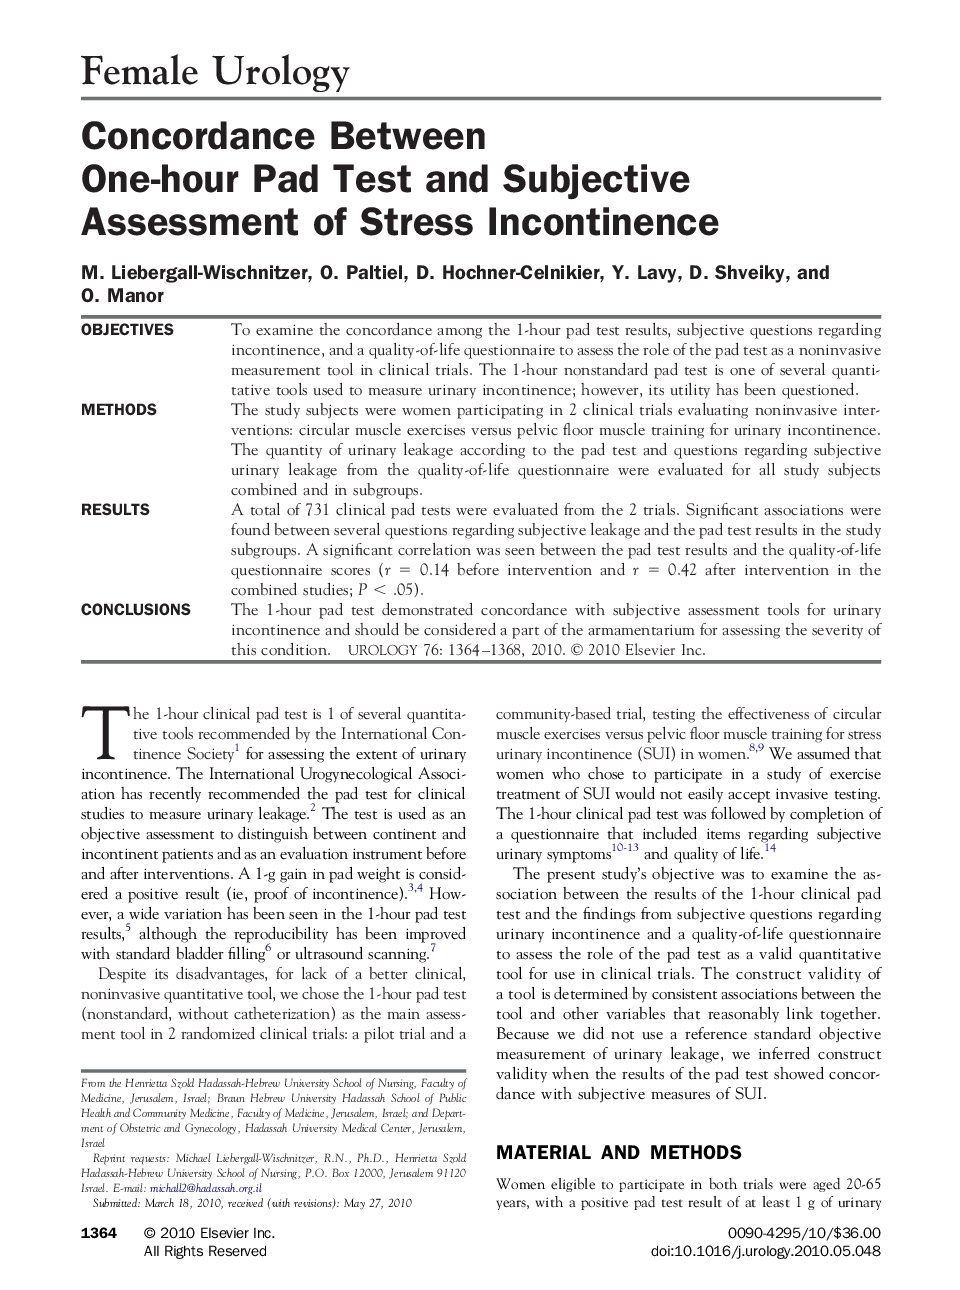 Concordance Between One-hour Pad Test and Subjective Assessment of Stress Incontinence